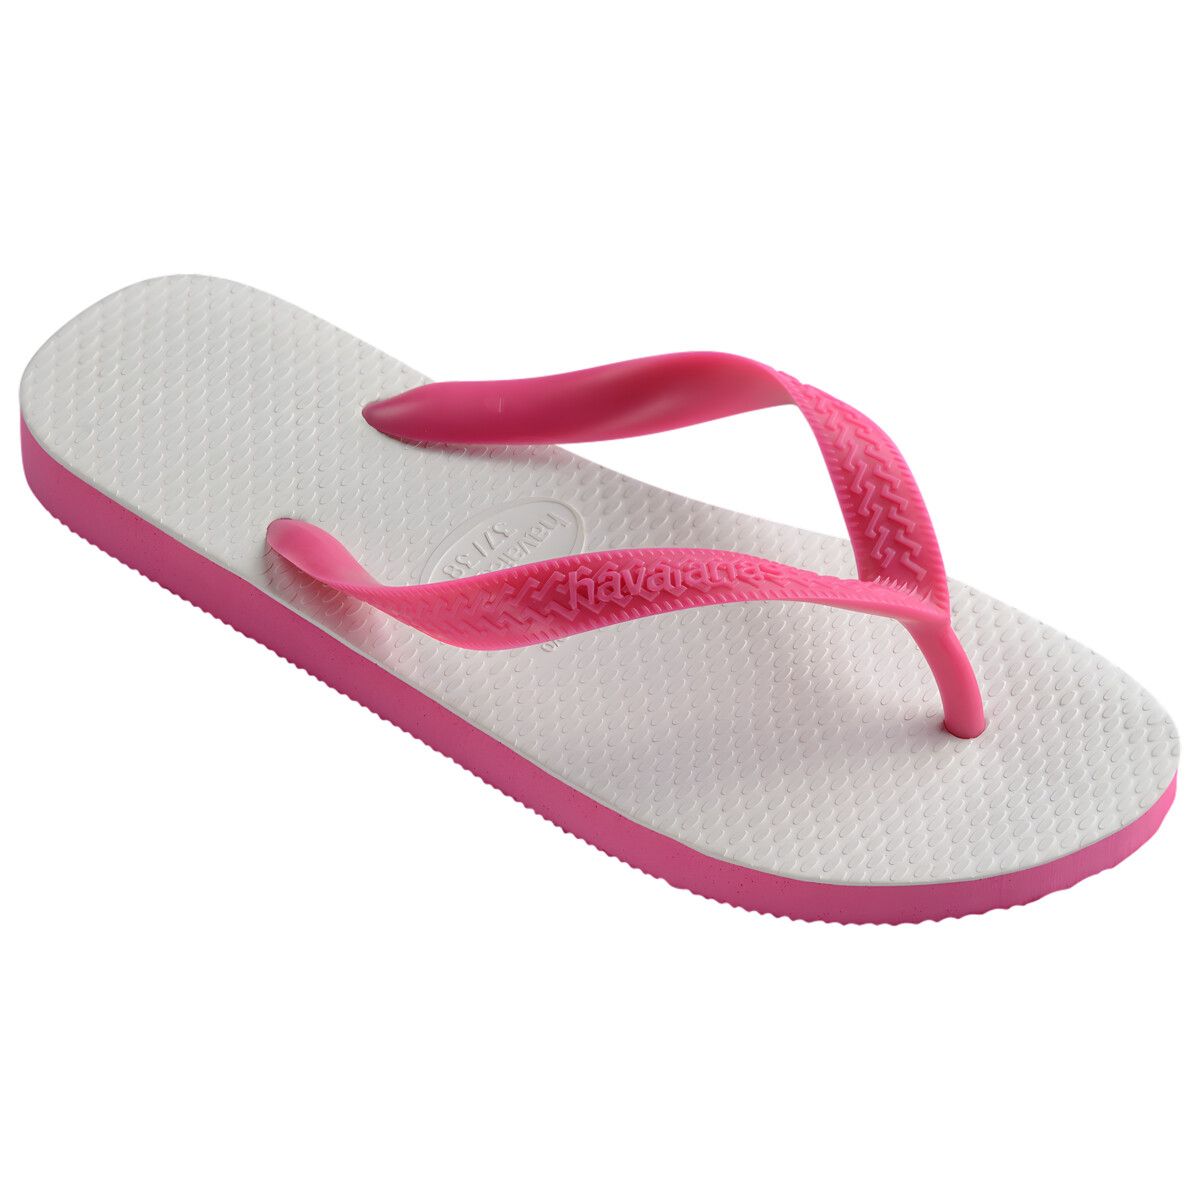 Chinelo Rosa Flux Tradicional Havaianas  n° 41/42 image number 1